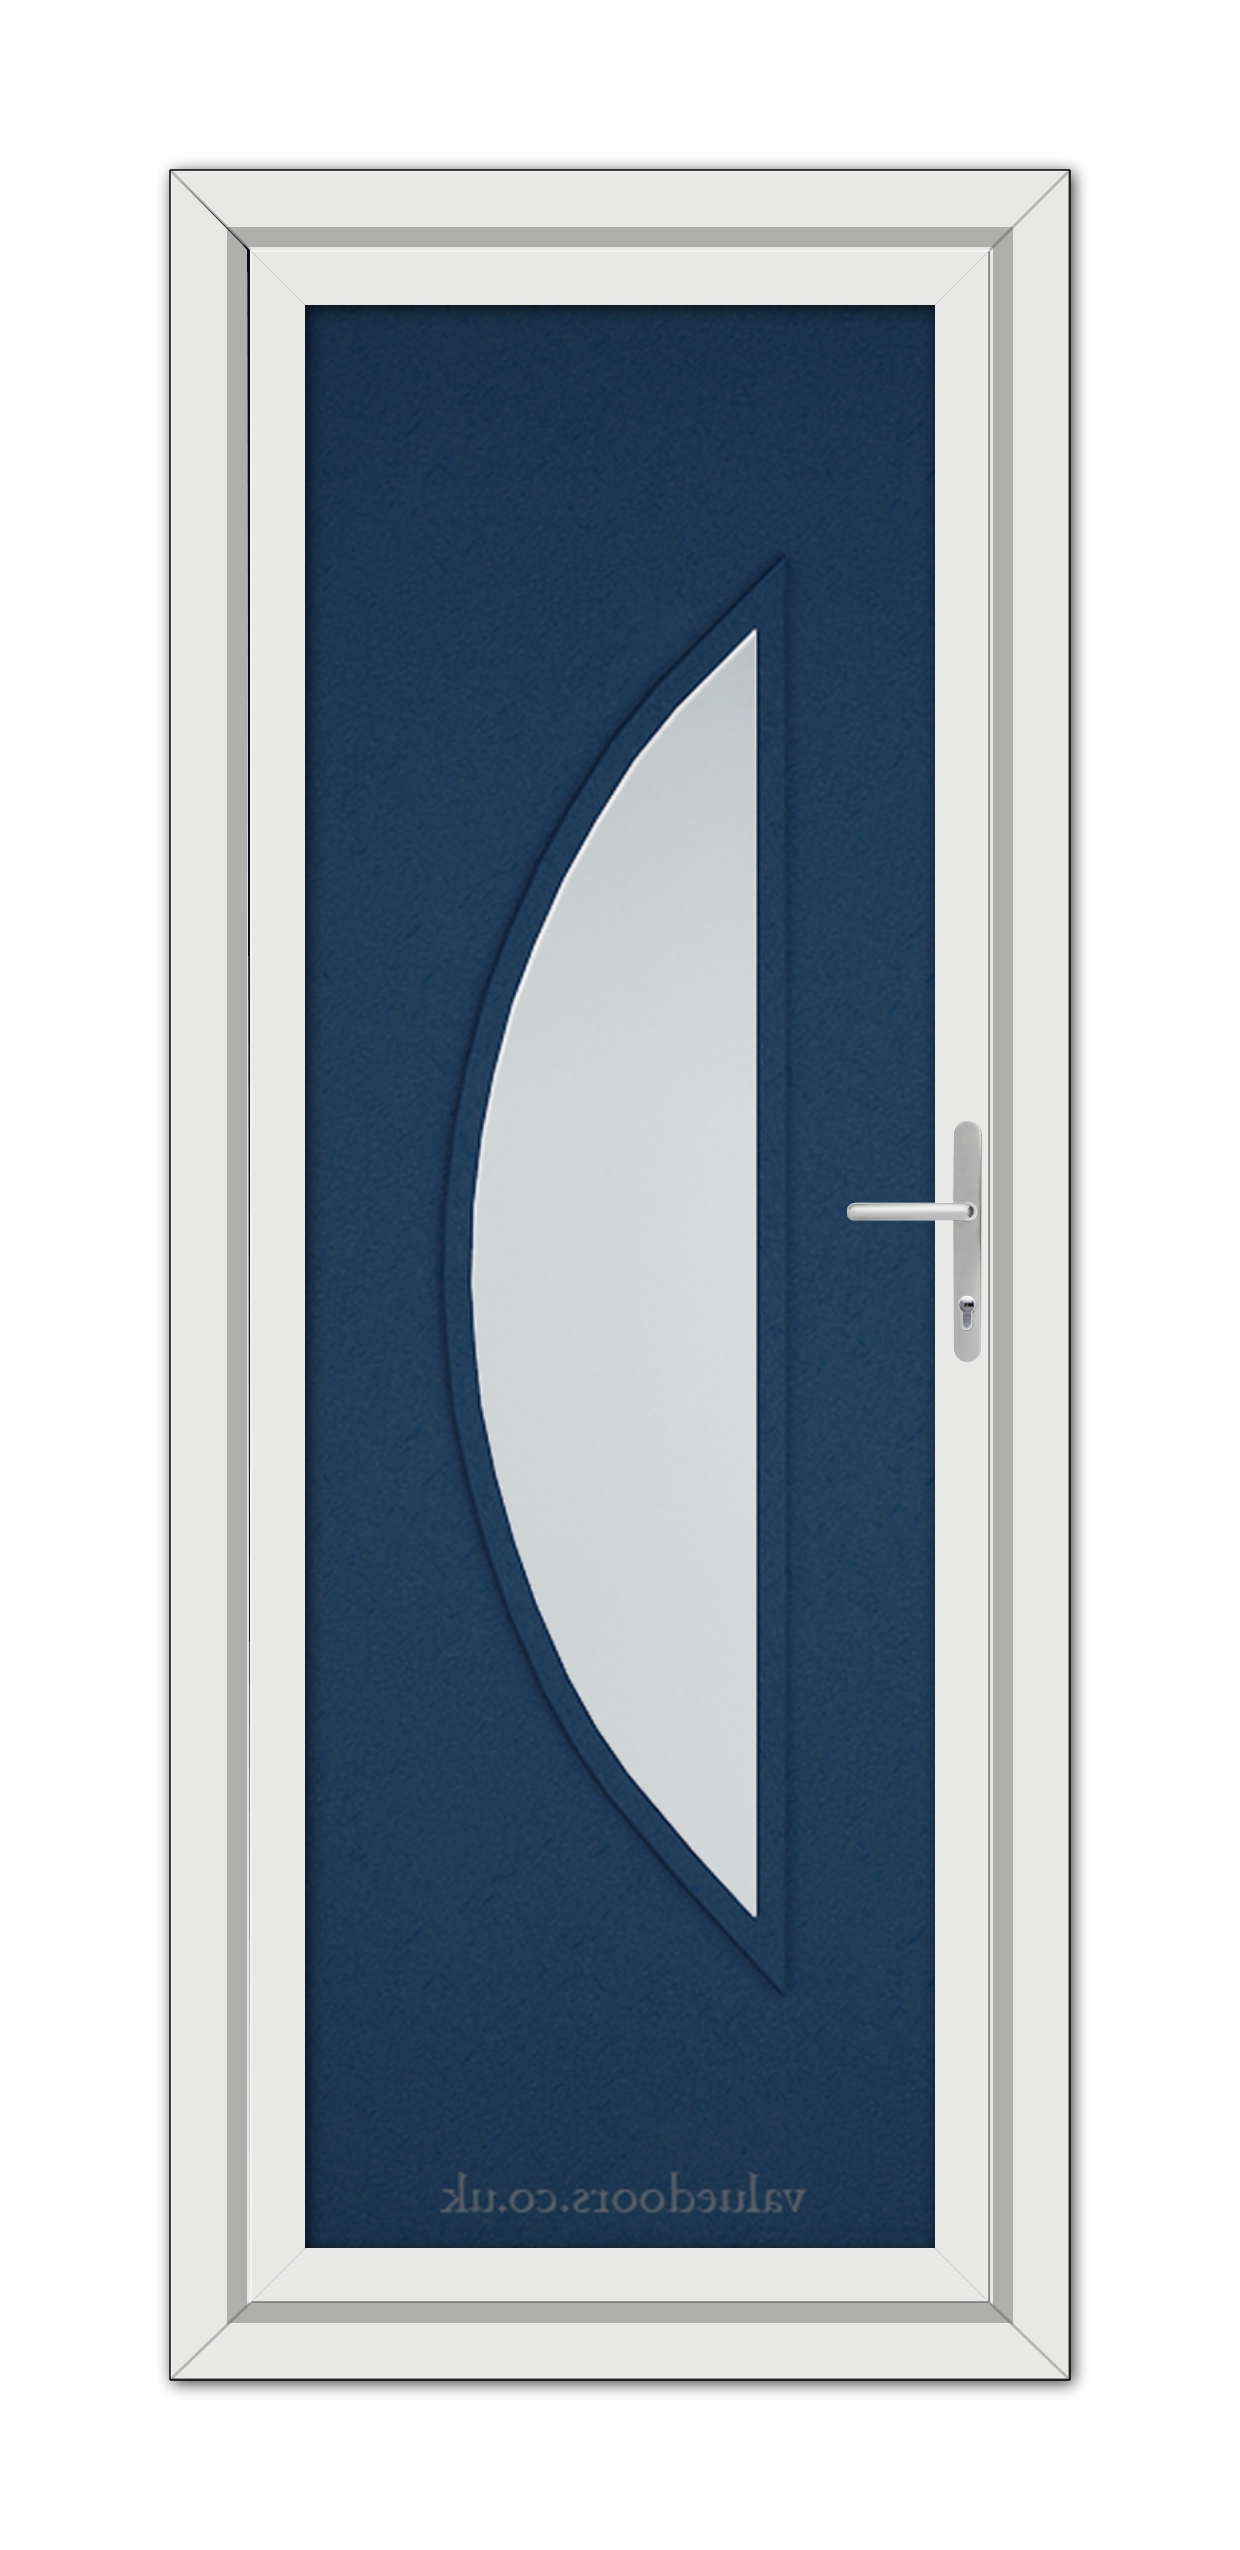 Blue Modern 5051 uPVC door with a large, centered, elliptical frosted glass panel, a white frame, and a metal handle.